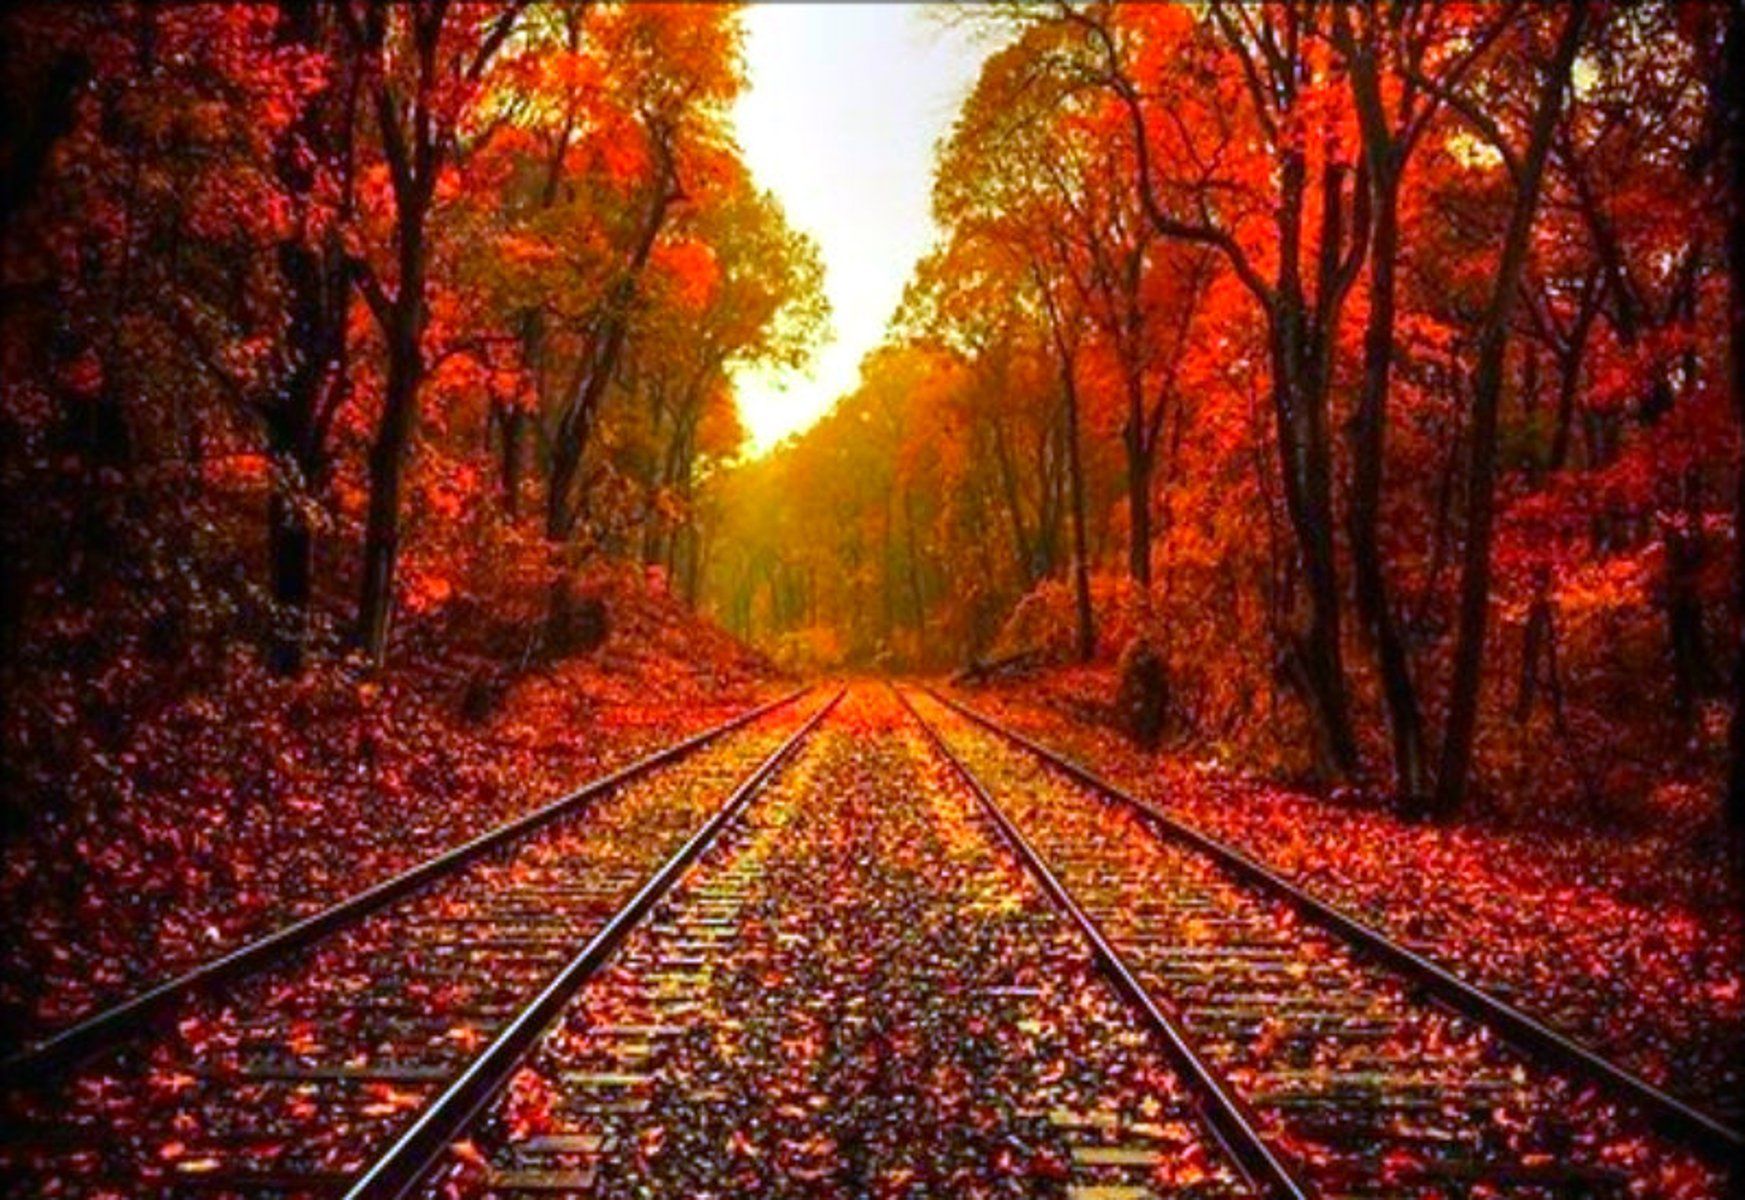 Beautiful Fall Pictures Autumn Wallpaper